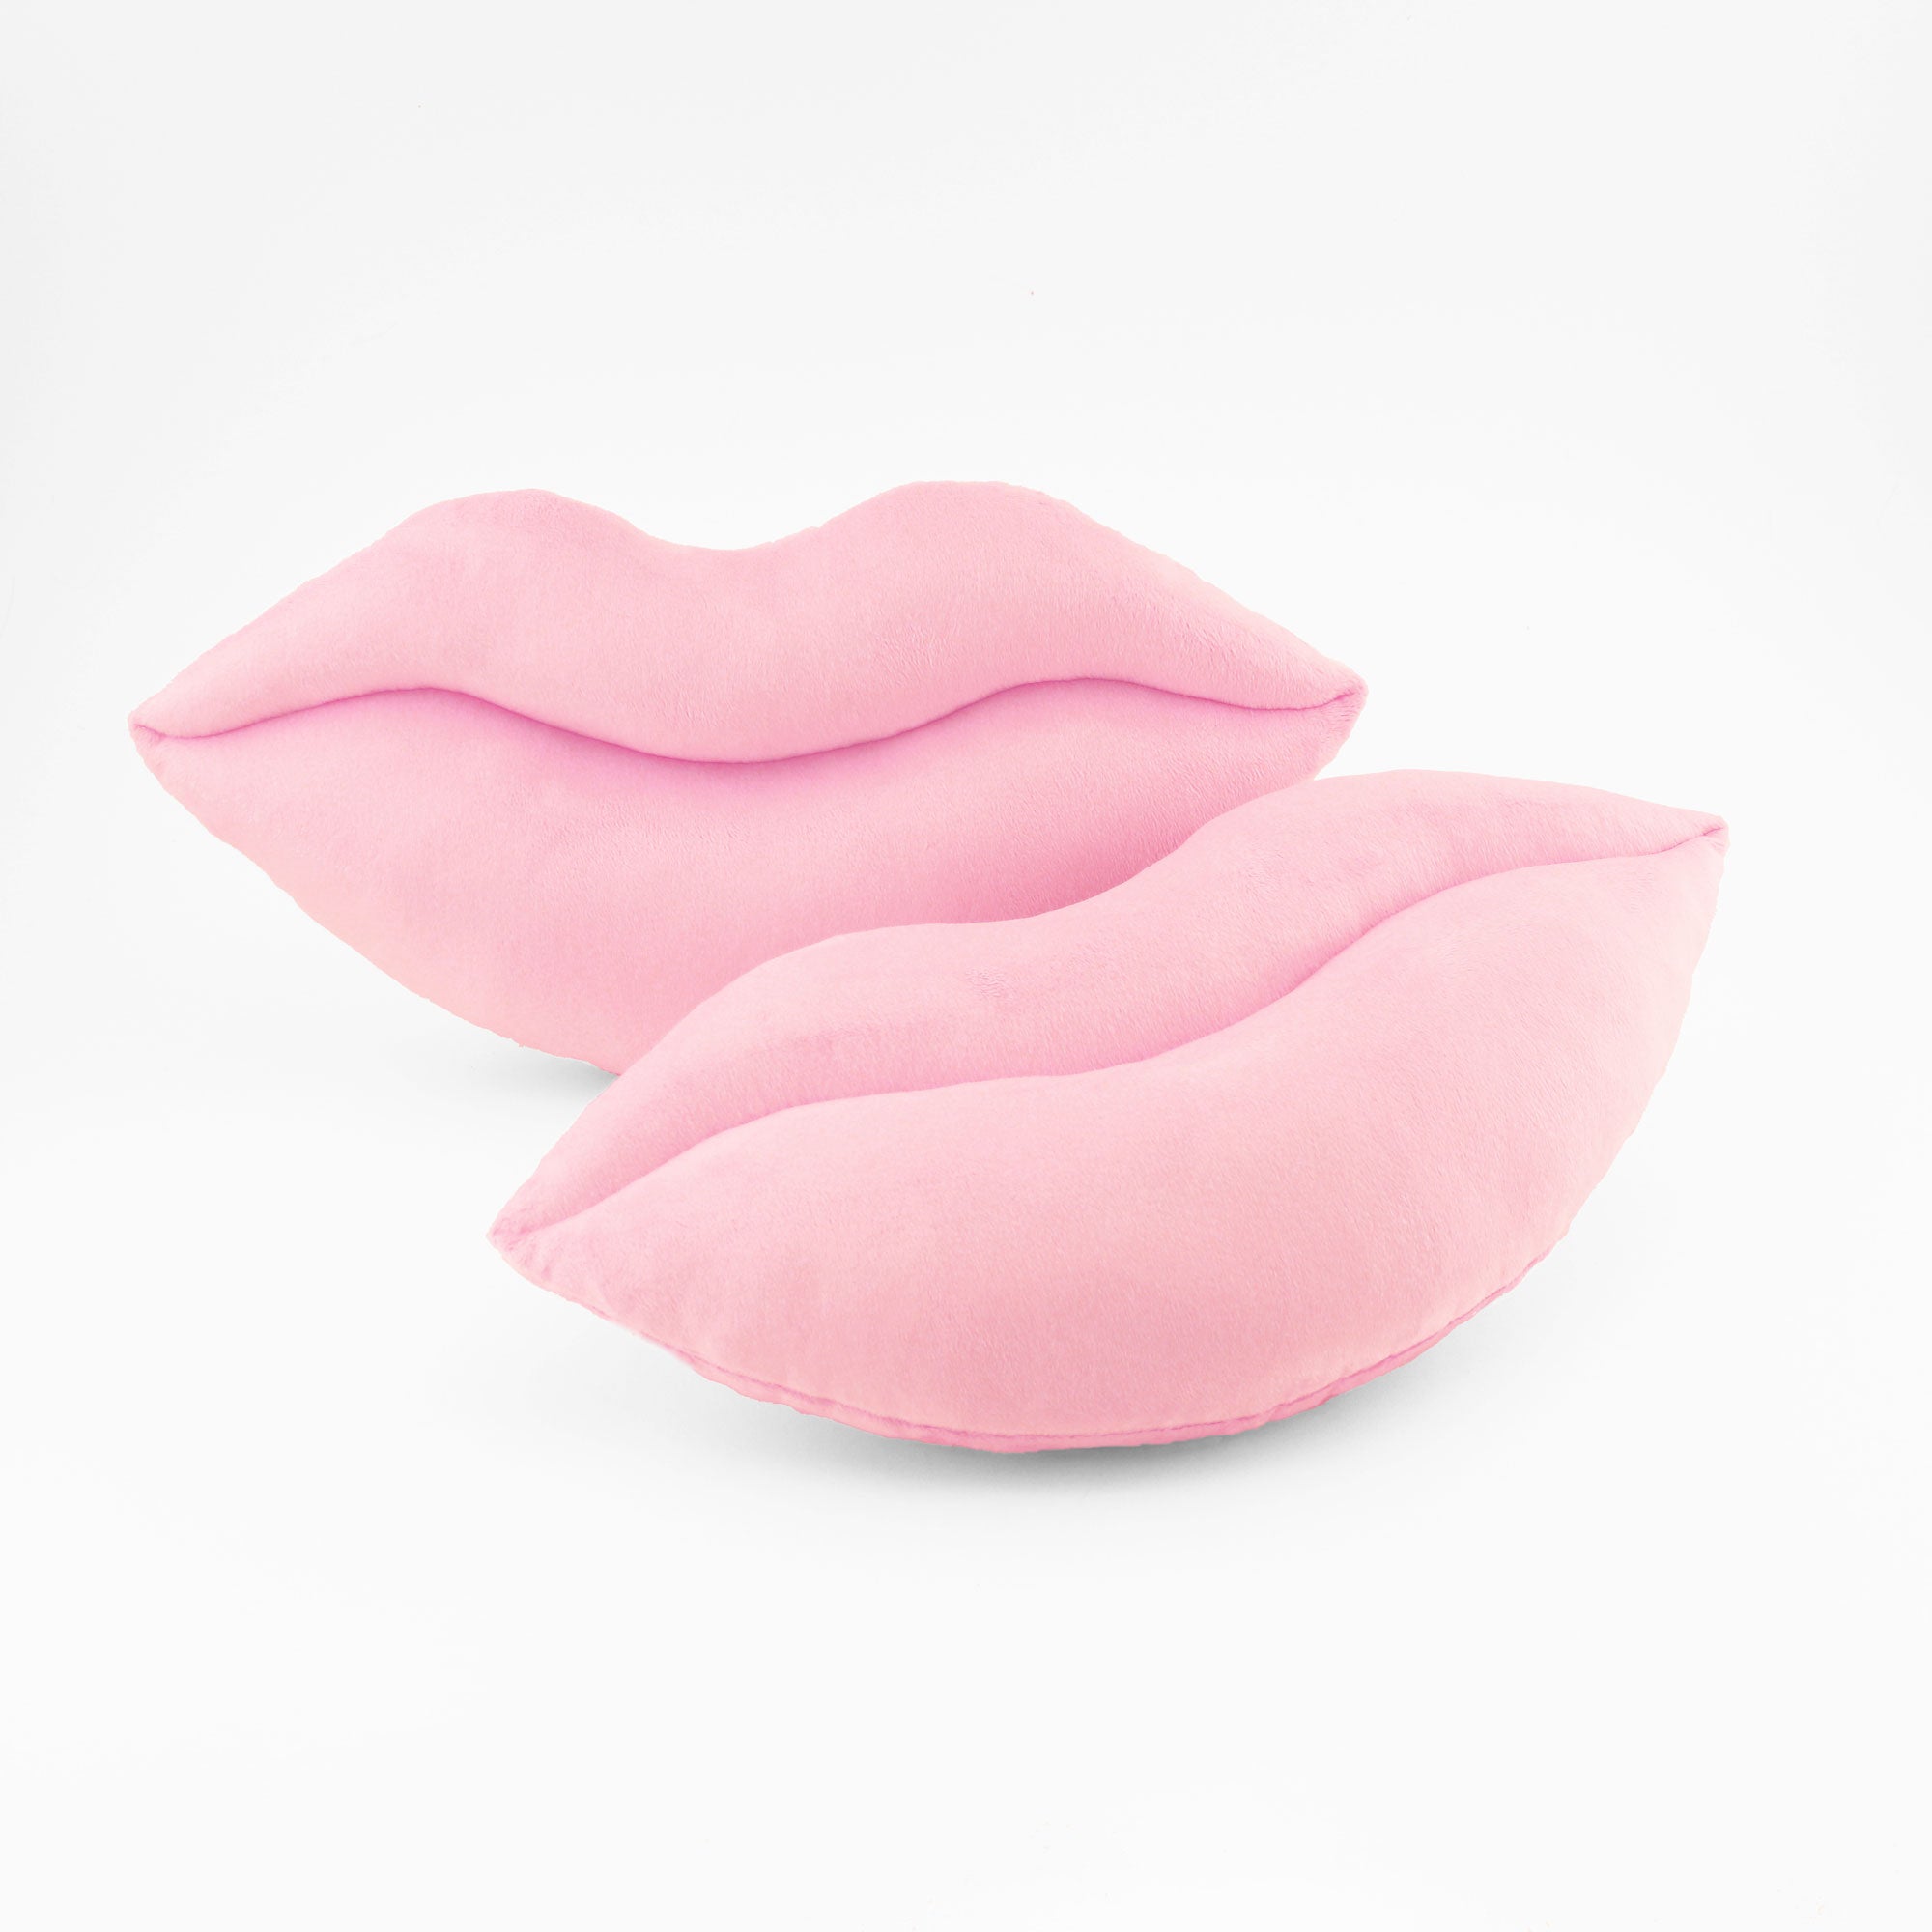 A pair of light baby pink lips shaped decorative throw pillows.